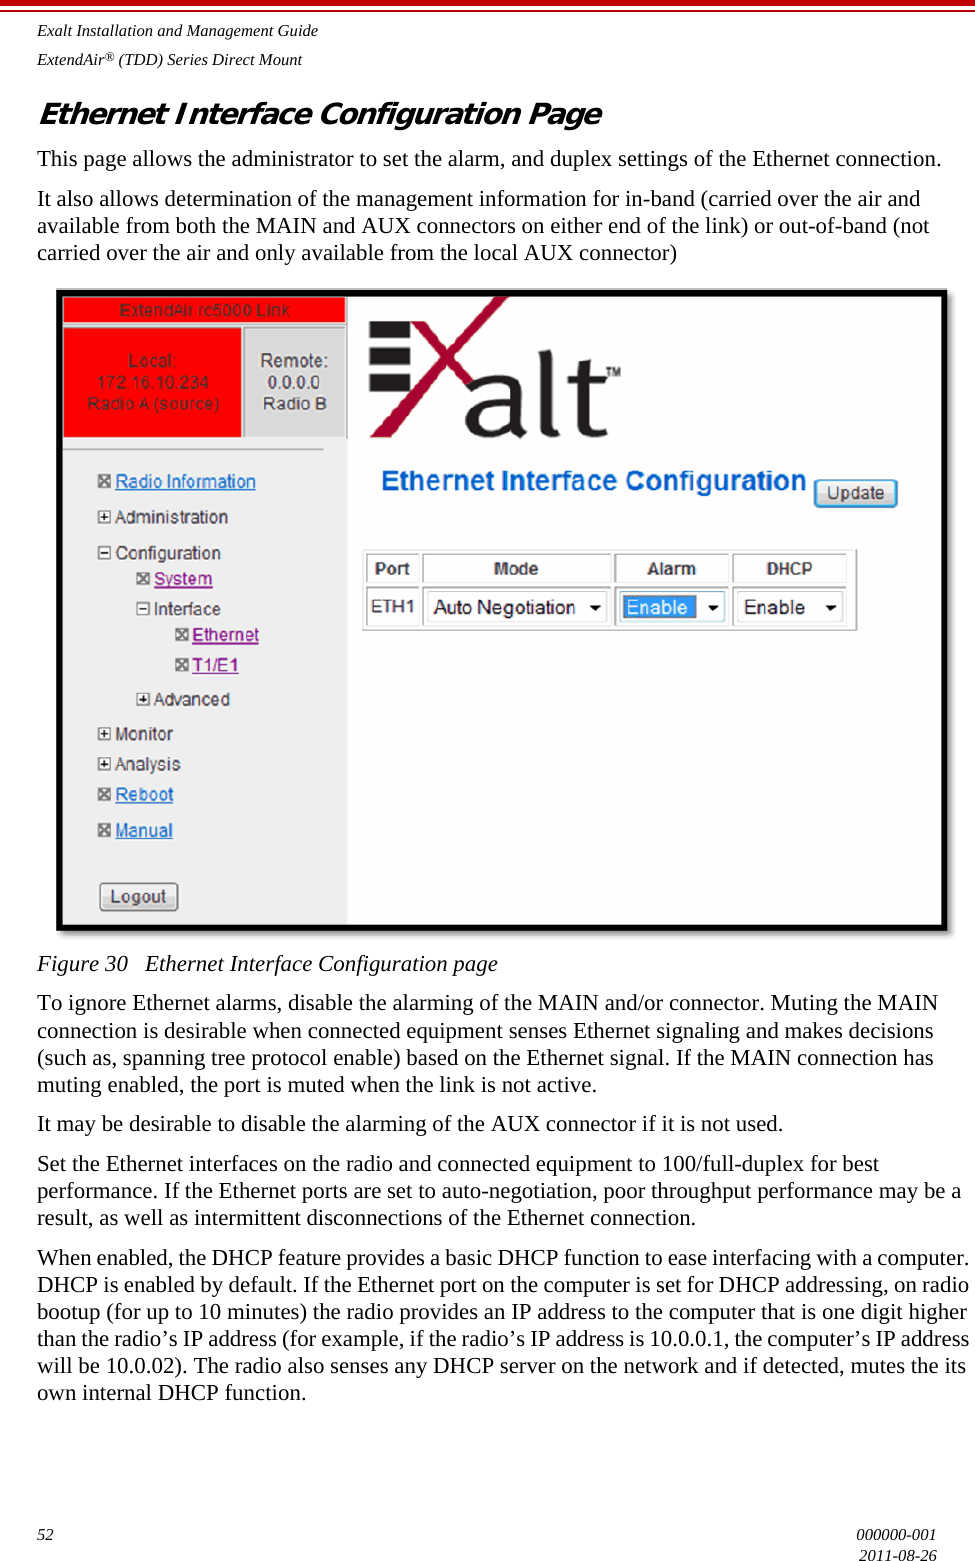 Exalt Installation and Management GuideExtendAir® (TDD) Series Direct Mount52 000000-0012011-08-26Ethernet Interface Configuration PageThis page allows the administrator to set the alarm, and duplex settings of the Ethernet connection. It also allows determination of the management information for in-band (carried over the air and available from both the MAIN and AUX connectors on either end of the link) or out-of-band (not carried over the air and only available from the local AUX connector)Figure 30   Ethernet Interface Configuration pageTo ignore Ethernet alarms, disable the alarming of the MAIN and/or connector. Muting the MAIN connection is desirable when connected equipment senses Ethernet signaling and makes decisions (such as, spanning tree protocol enable) based on the Ethernet signal. If the MAIN connection has muting enabled, the port is muted when the link is not active.It may be desirable to disable the alarming of the AUX connector if it is not used.Set the Ethernet interfaces on the radio and connected equipment to 100/full-duplex for best performance. If the Ethernet ports are set to auto-negotiation, poor throughput performance may be a result, as well as intermittent disconnections of the Ethernet connection. When enabled, the DHCP feature provides a basic DHCP function to ease interfacing with a computer. DHCP is enabled by default. If the Ethernet port on the computer is set for DHCP addressing, on radio bootup (for up to 10 minutes) the radio provides an IP address to the computer that is one digit higher than the radio’s IP address (for example, if the radio’s IP address is 10.0.0.1, the computer’s IP address will be 10.0.02). The radio also senses any DHCP server on the network and if detected, mutes the its own internal DHCP function.